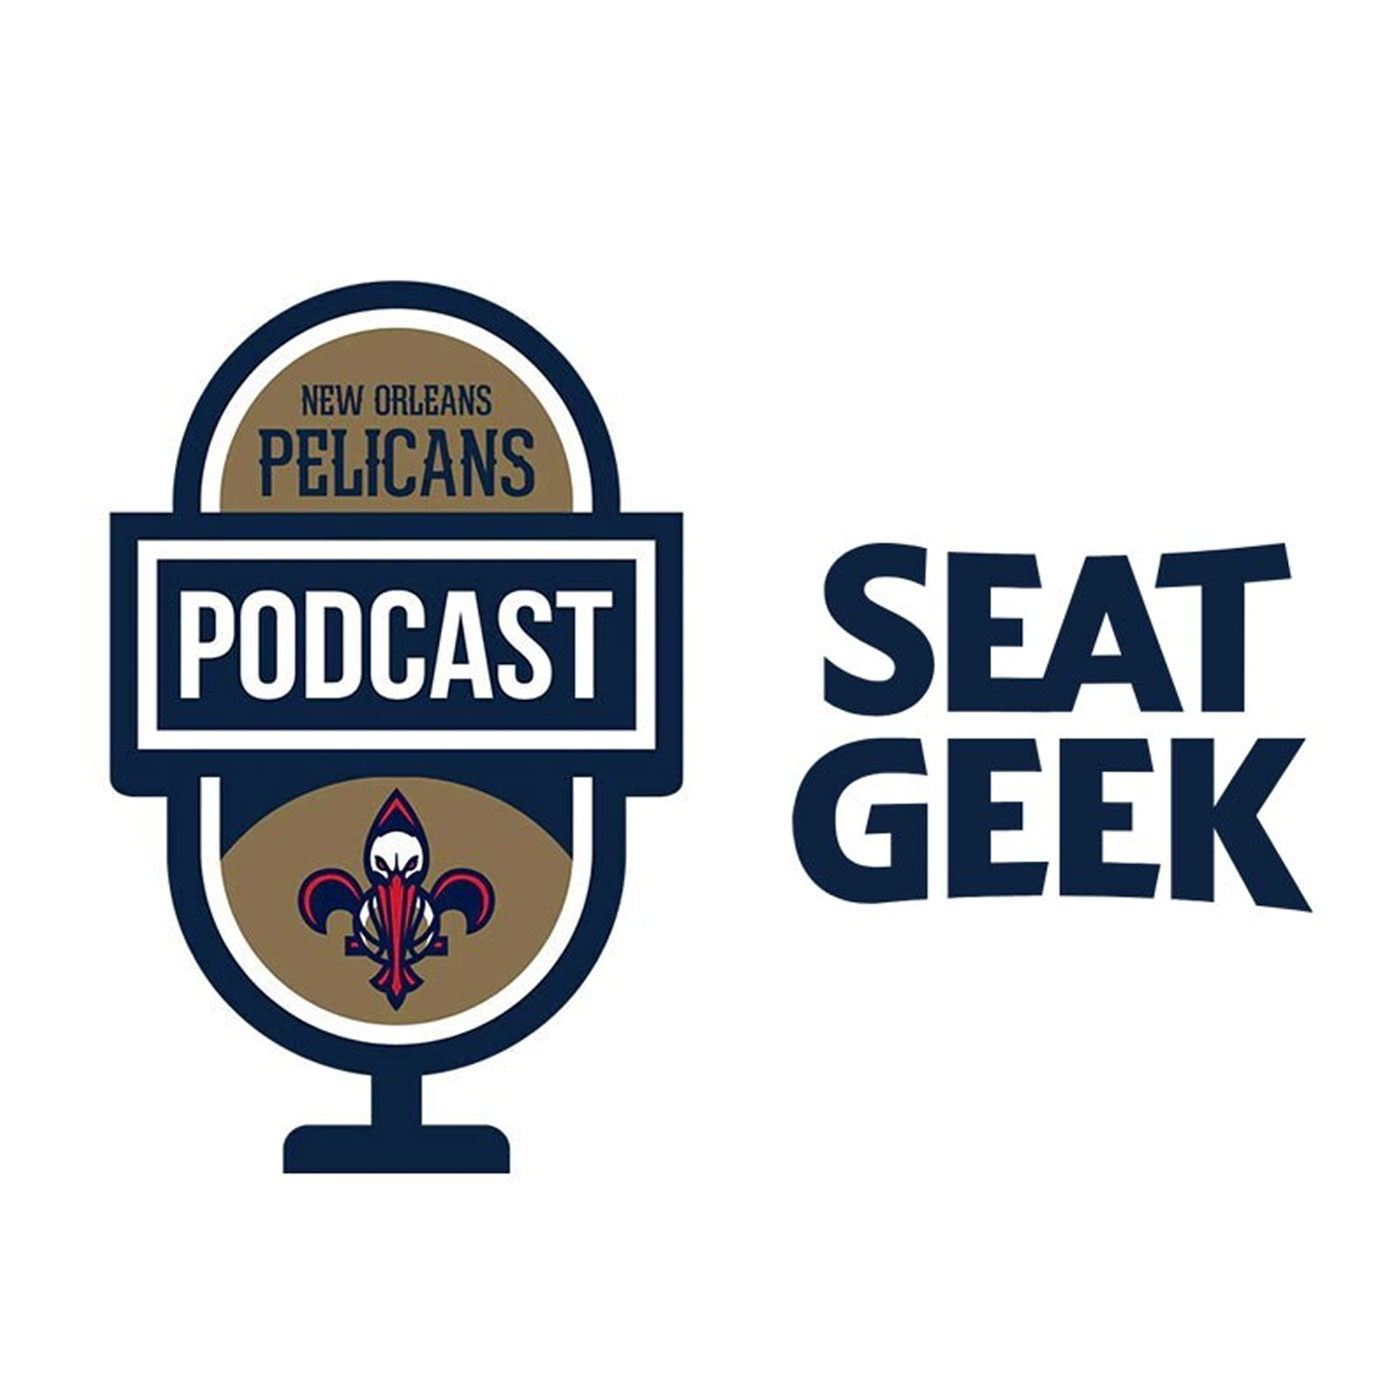 Rod Walker on the New Orleans Pelicans Podcast presented by SeatGeek - January 20, 2022